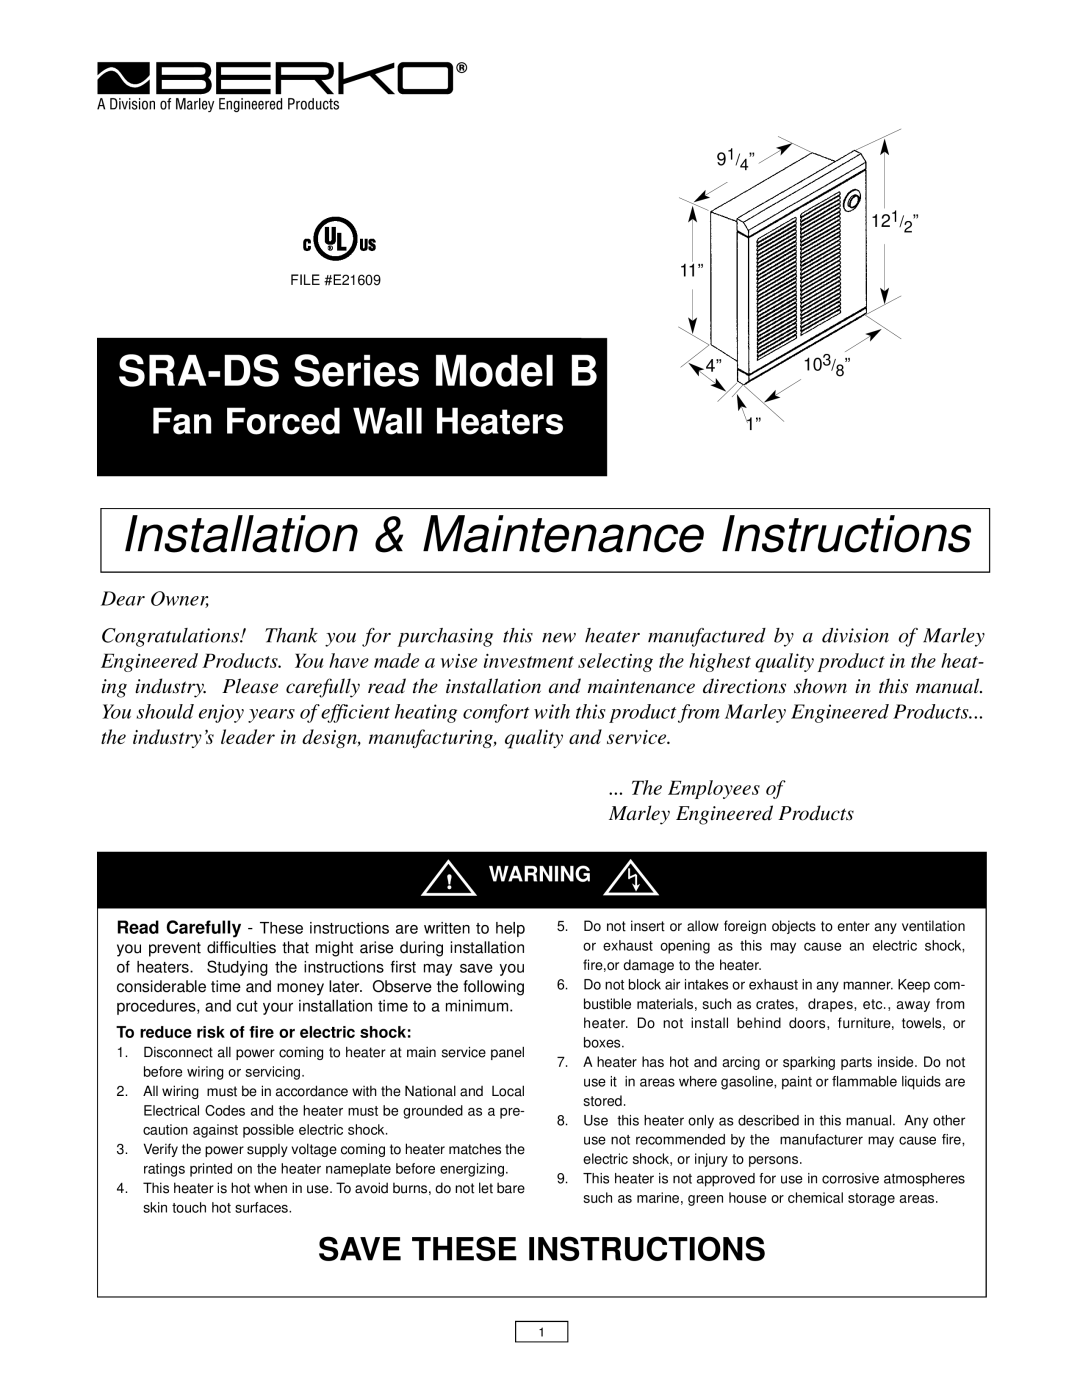 Marley Engineered Products SRA-DS SERIES MODEL B manual To reduce risk of fire or electric shock, SRA-DSSeries Model B 